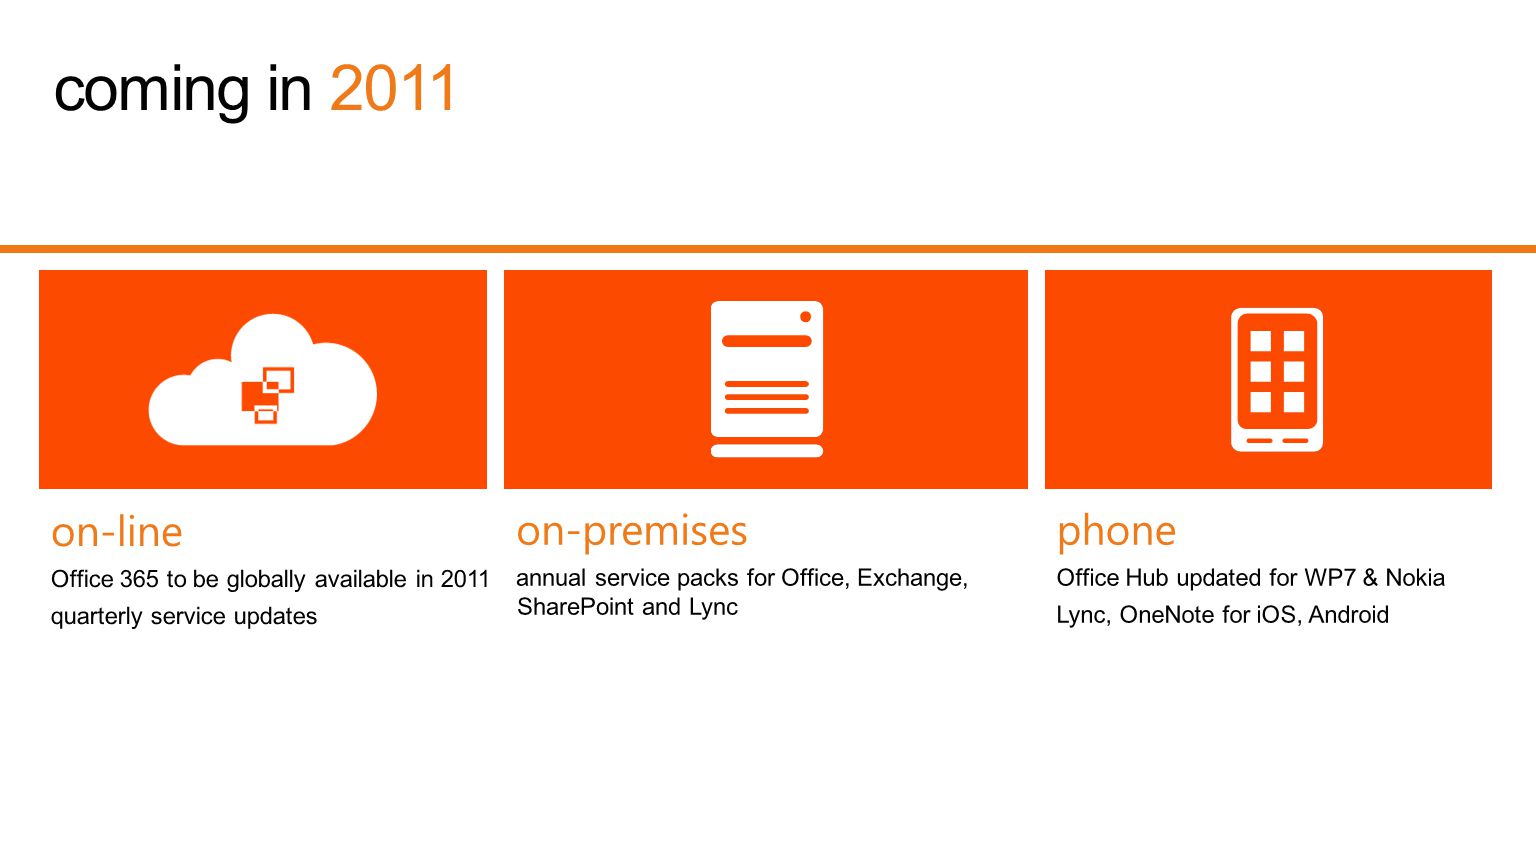 | Copyright© 2010 Microsoft Corporation coming in 2011 phone Office Hub updated for WP7 & Nokia Lync, OneNote for iOS, Android on-premises annual service packs for Office, Exchange, SharePoint and Lync on-line Office 365 to be globally available in 2011 quarterly service updates